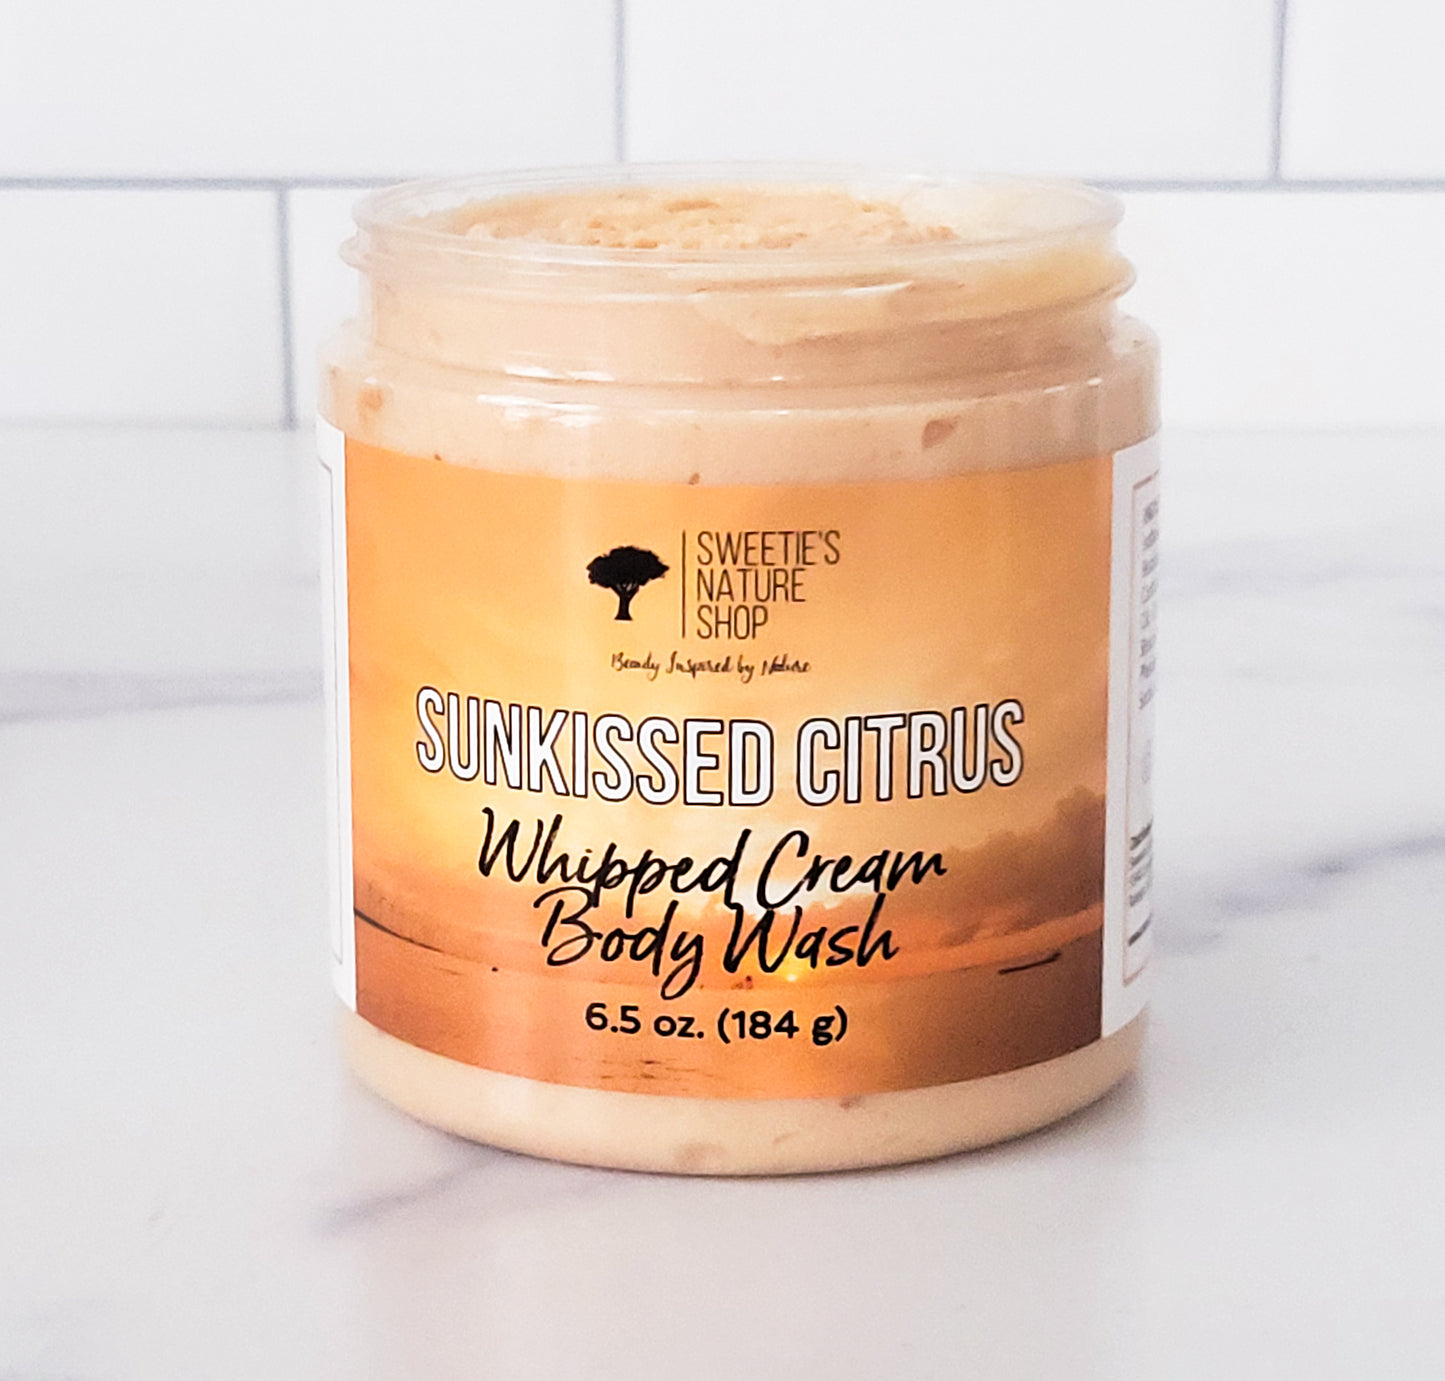 Sunkissed Citrus Whipped Cream Body Wash